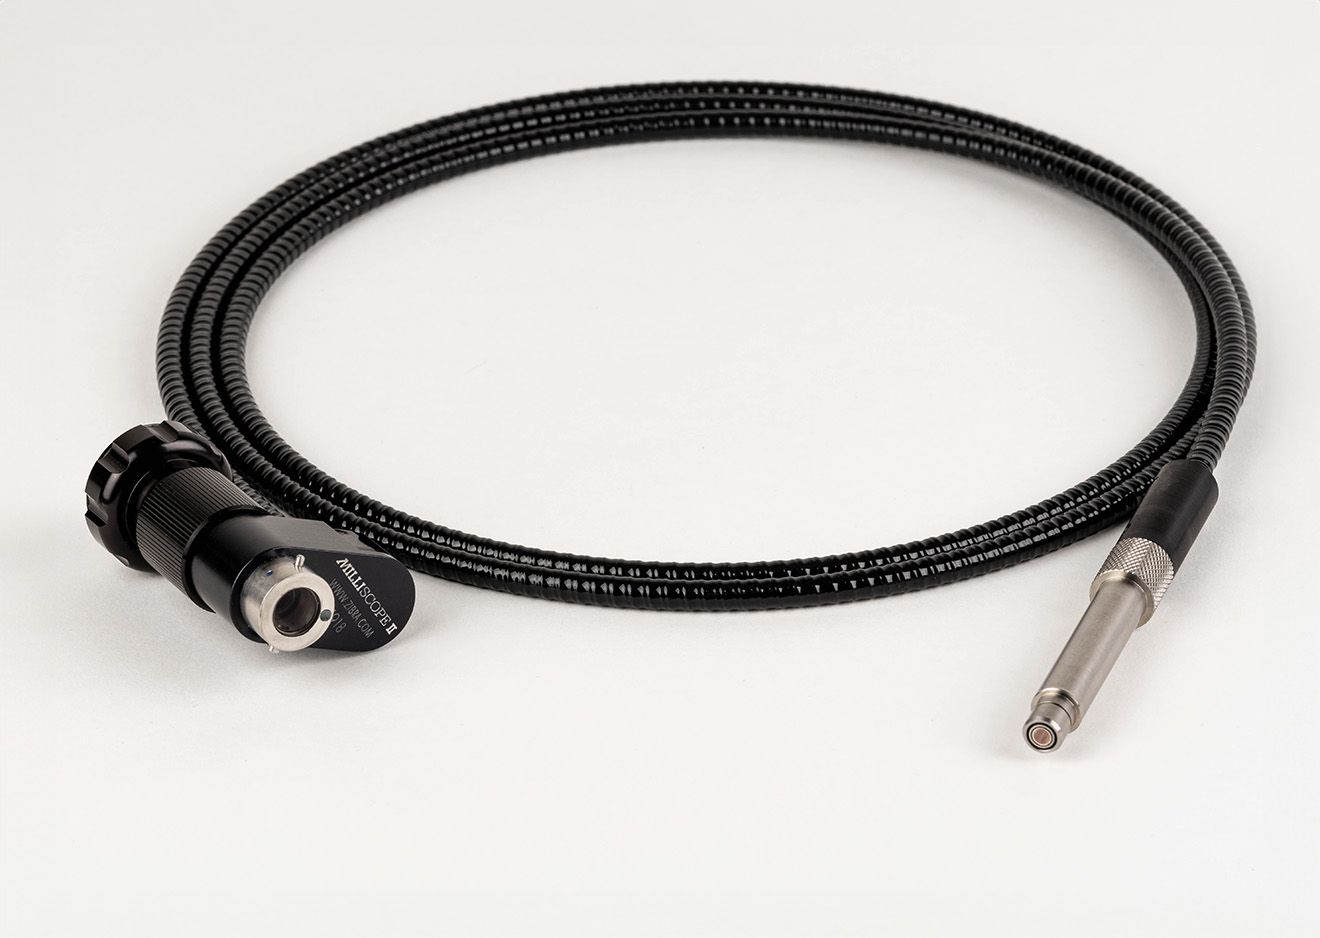 A black cable with a metal tip is sitting on a white surface